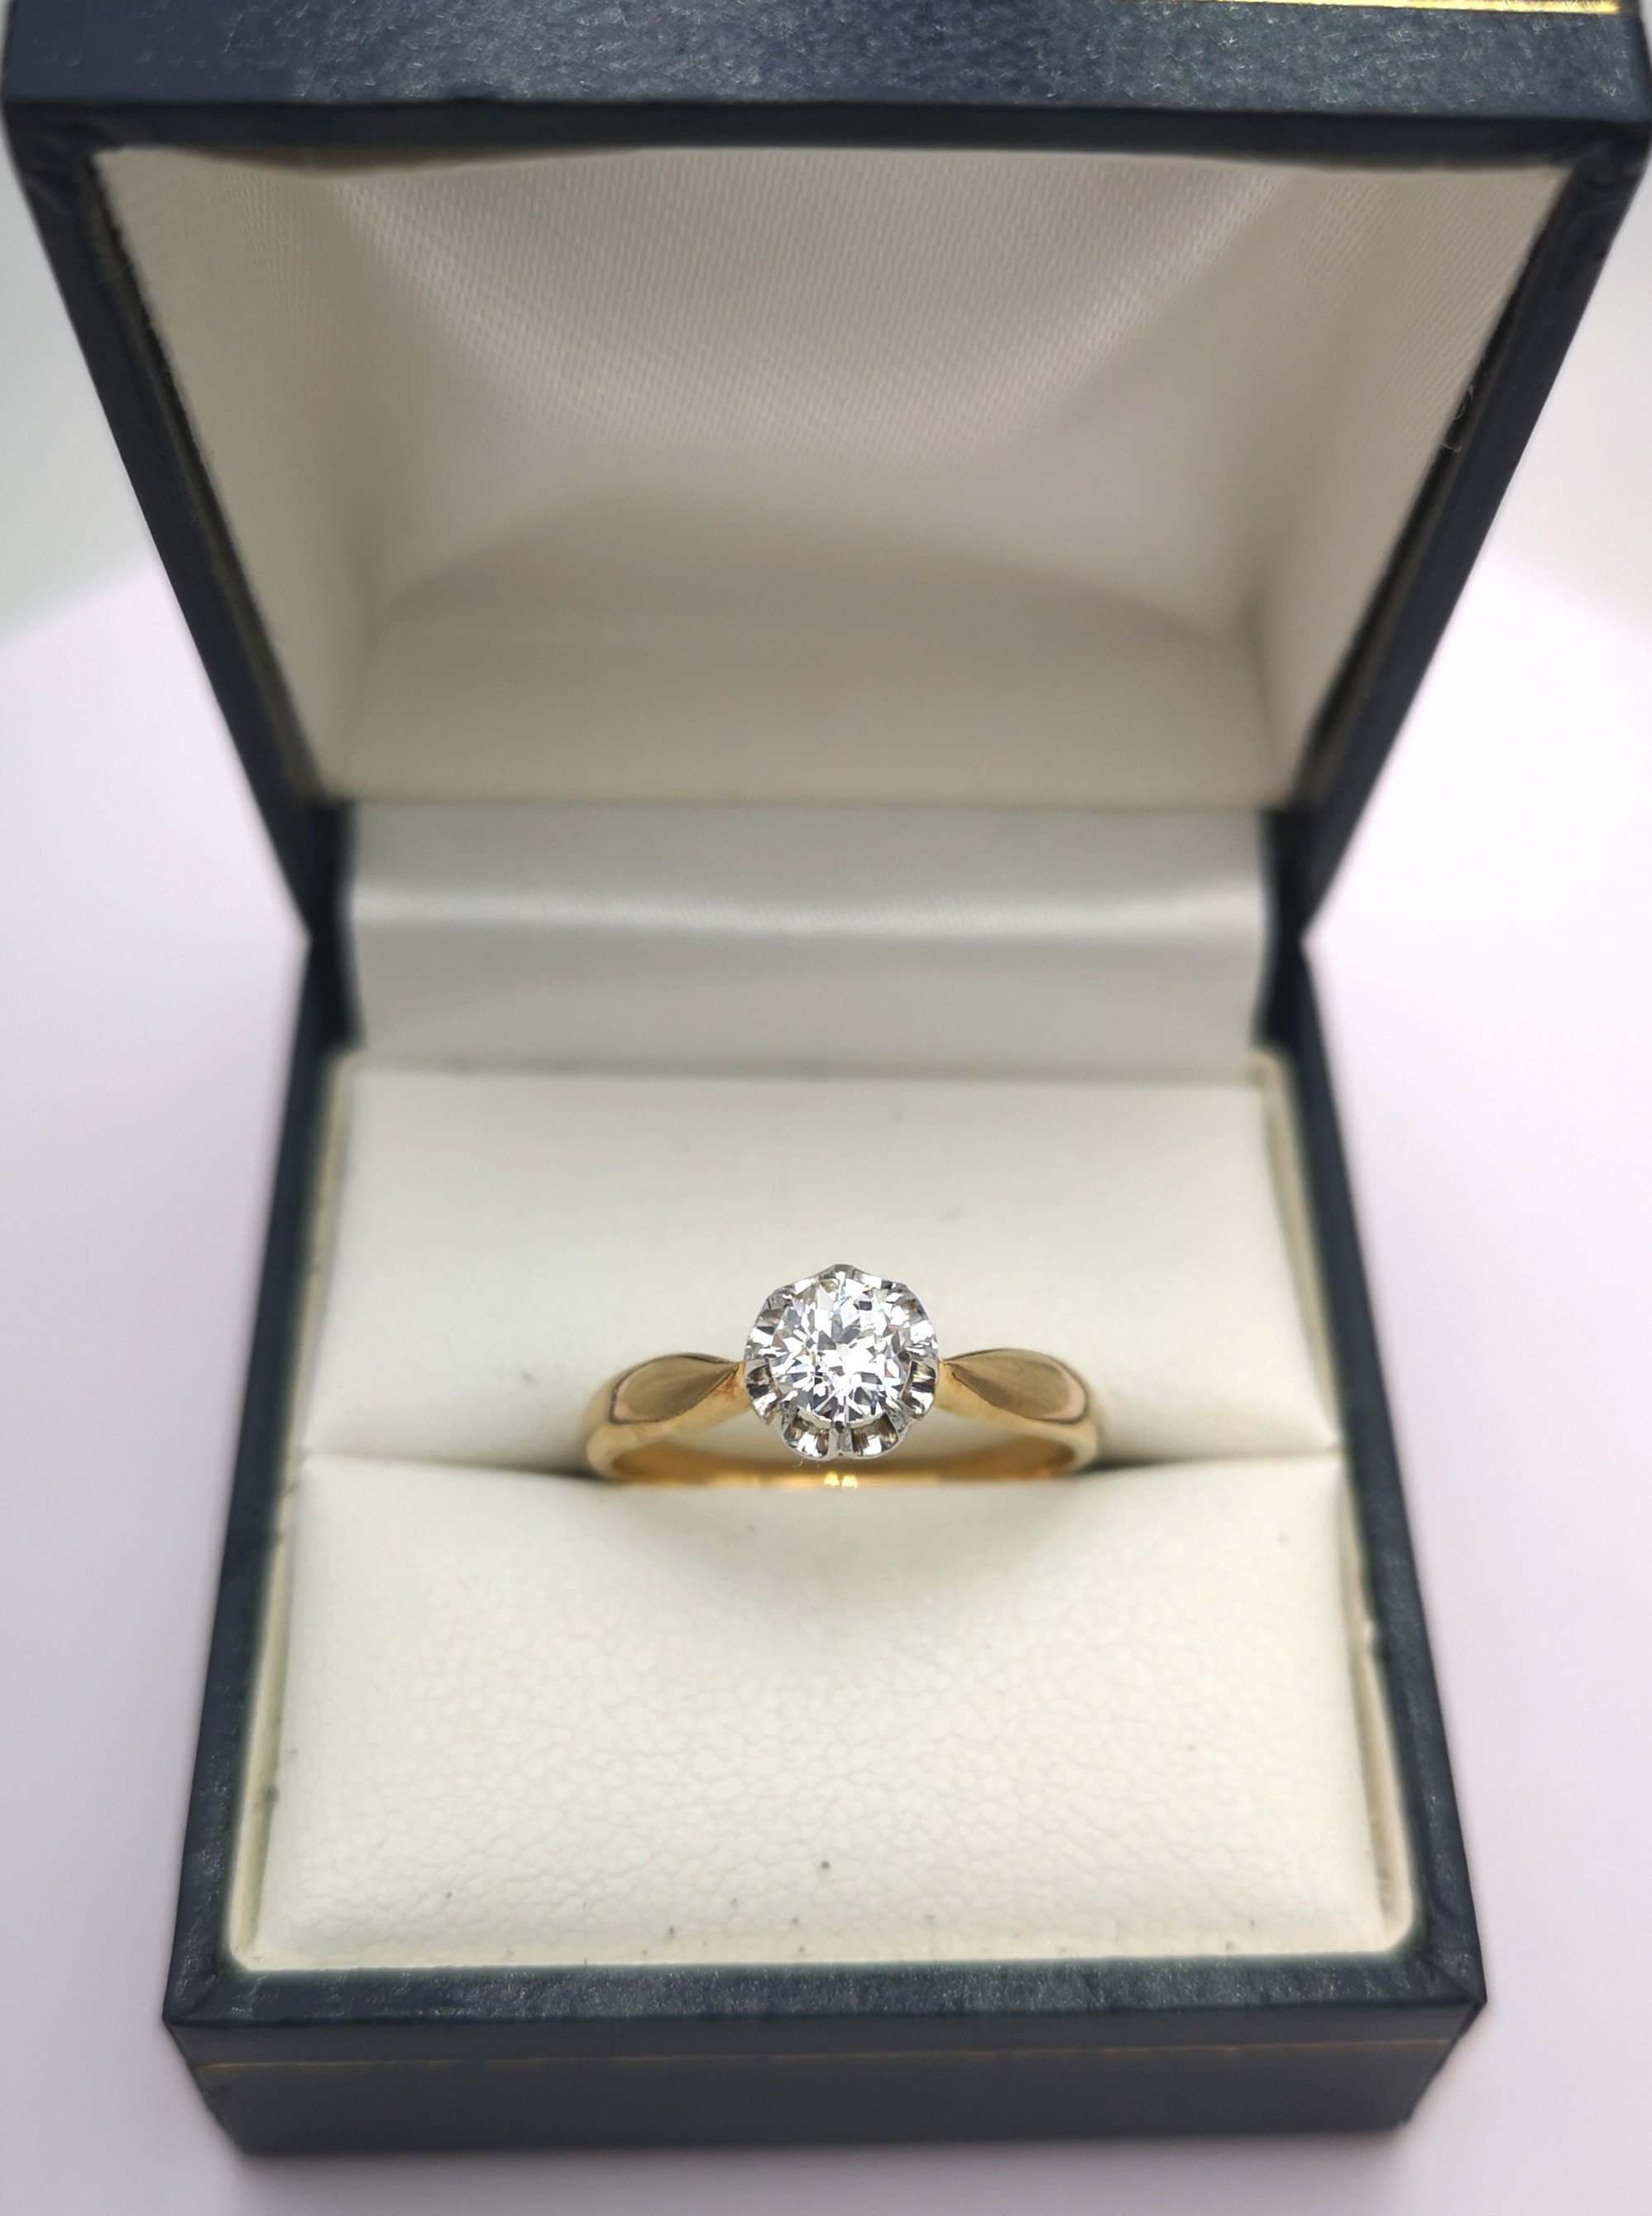 Reserved for H. - Vintage old cut diamond 18K gold solitaire ring ...